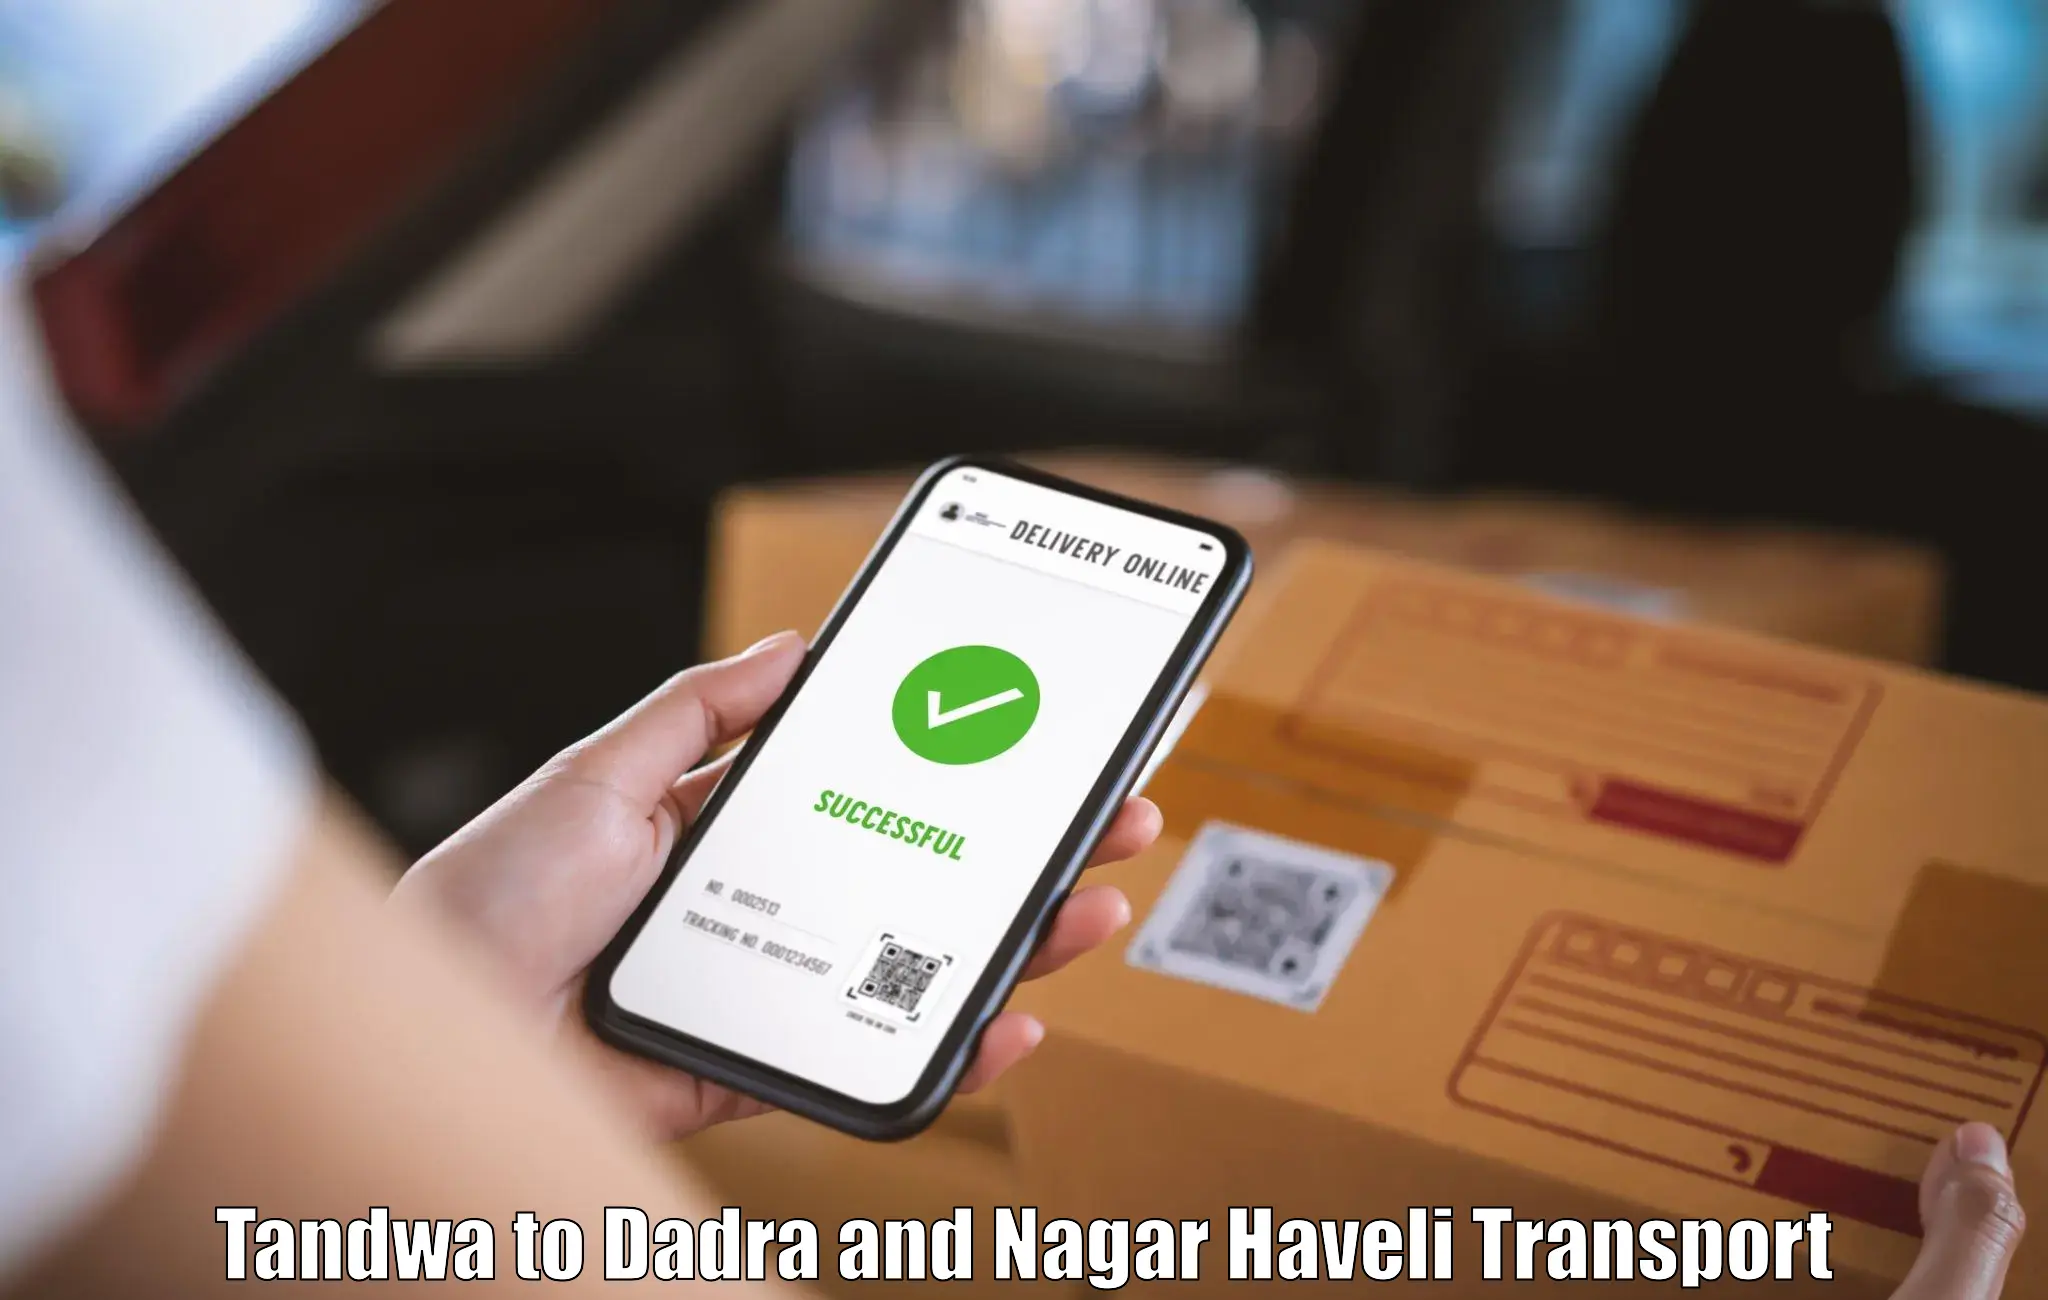 Part load transport service in India Tandwa to Dadra and Nagar Haveli